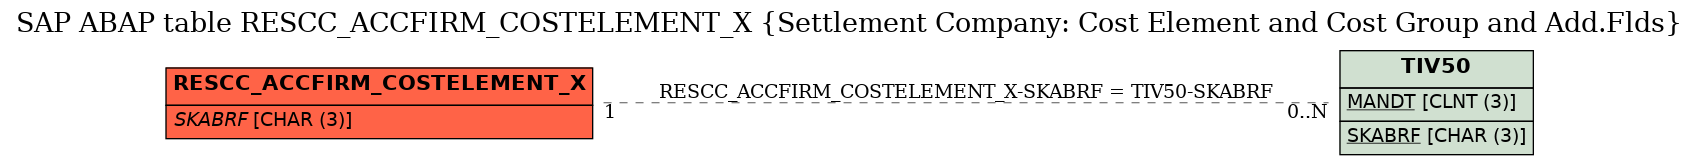 E-R Diagram for table RESCC_ACCFIRM_COSTELEMENT_X (Settlement Company: Cost Element and Cost Group and Add.Flds)